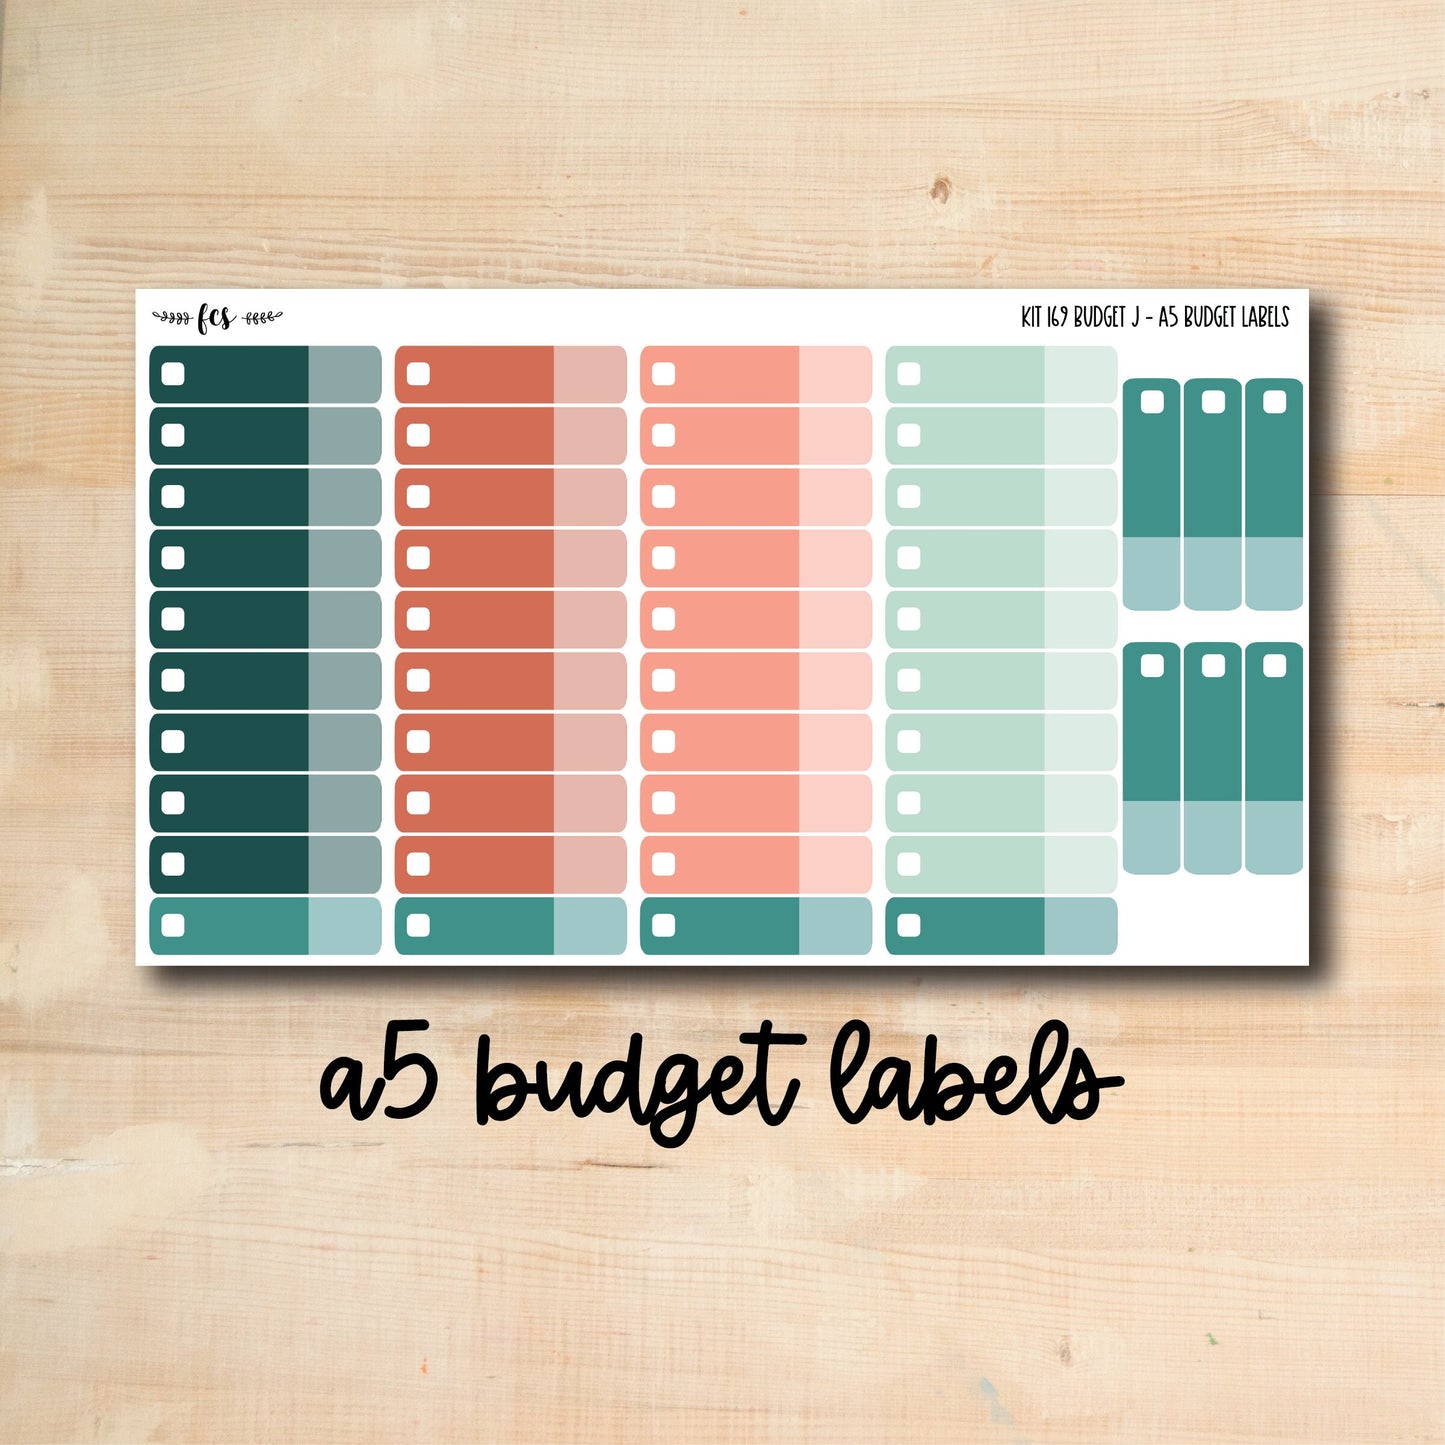 BUDGET-169 || TROPICAL LEAVES A5 budget labels